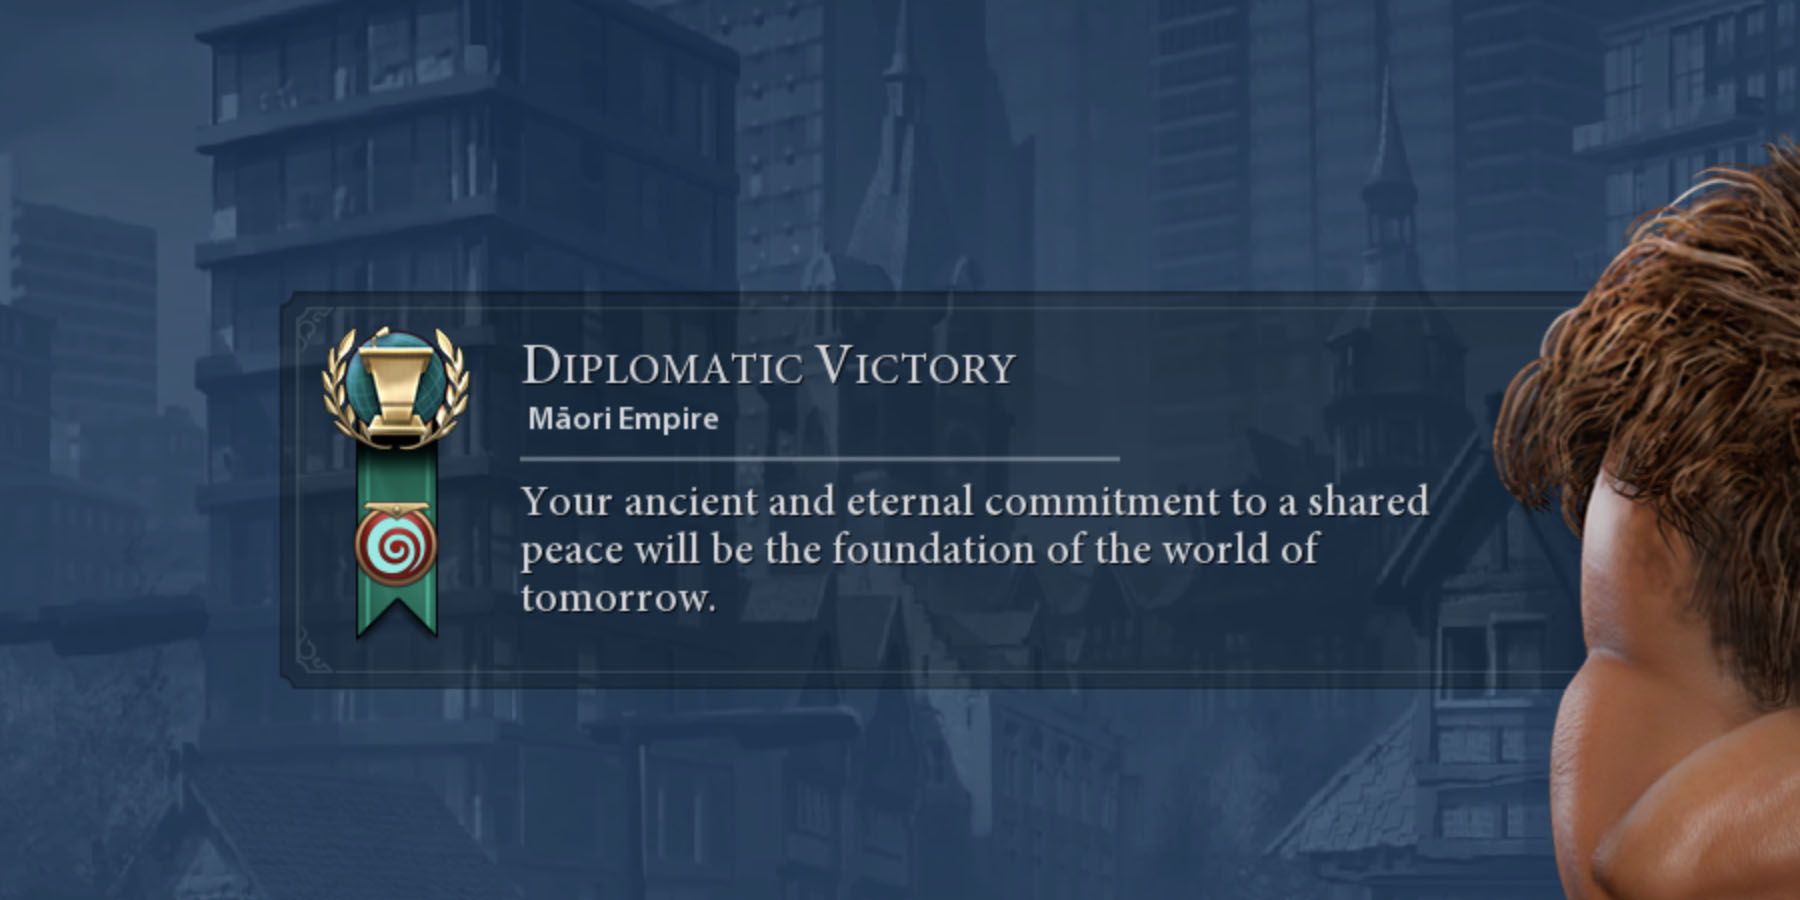 Winning a Diplomatic Victory